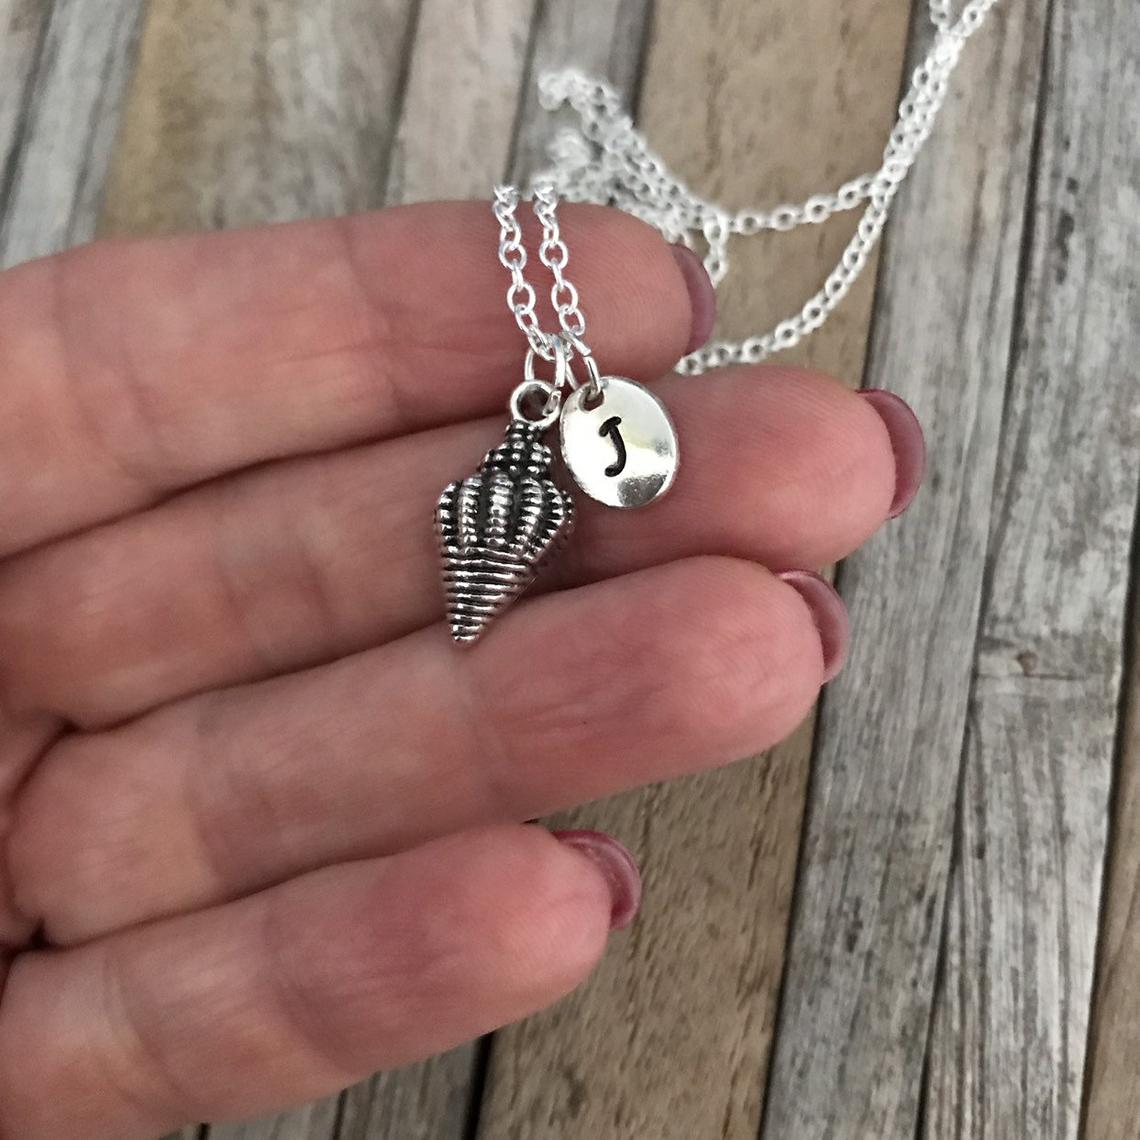 Personalized silver shell necklace, Sea jewellery with monogram charm –  Carrie Clover handcrafted gifts